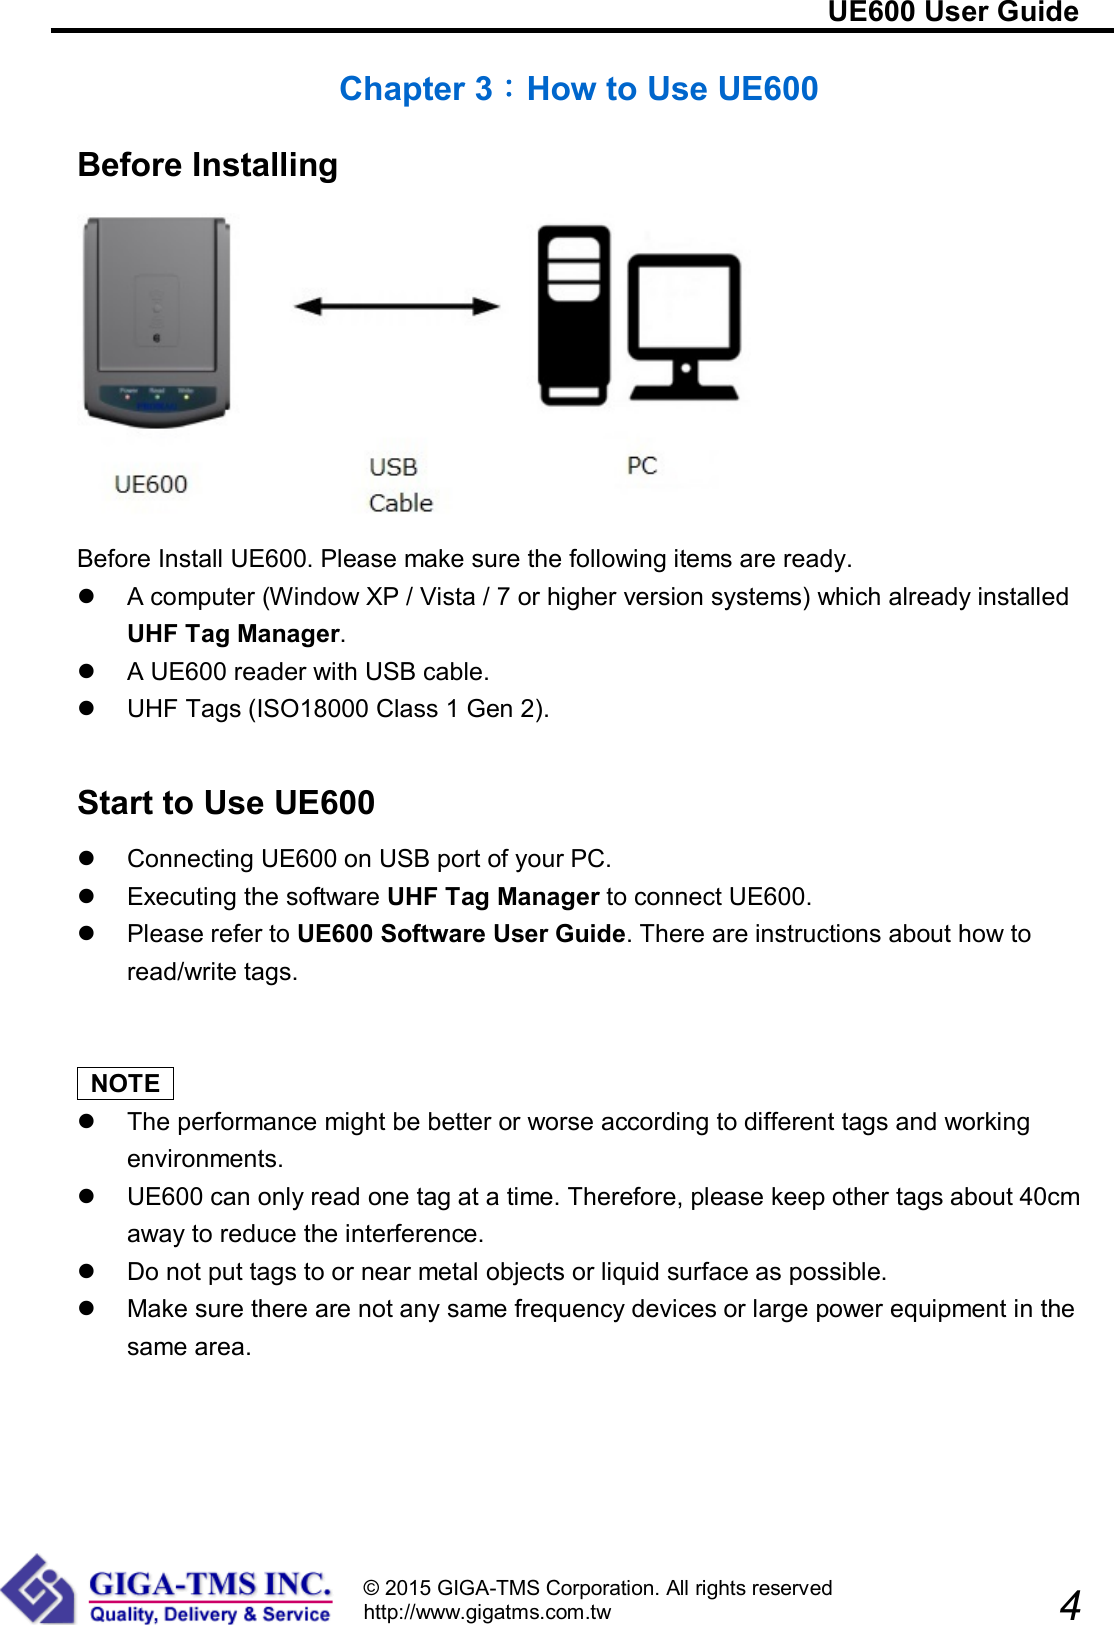                                                                         UE600 User Guide                            4 © 2015 GIGA-TMS Corporation. All rights reserved http://www.gigatms.com.tw  Chapter 3：How to Use UE600 Before Installing  Before Install UE600. Please make sure the following items are ready.   A computer (Window XP / Vista / 7 or higher version systems) which already installed UHF Tag Manager.   A UE600 reader with USB cable.   UHF Tags (ISO18000 Class 1 Gen 2).   Start to Use UE600   Connecting UE600 on USB port of your PC.   Executing the software UHF Tag Manager to connect UE600.   Please refer to UE600 Software User Guide. There are instructions about how to read/write tags.     NOTE     The performance might be better or worse according to different tags and working environments.   UE600 can only read one tag at a time. Therefore, please keep other tags about 40cm away to reduce the interference.   Do not put tags to or near metal objects or liquid surface as possible.   Make sure there are not any same frequency devices or large power equipment in the same area.  